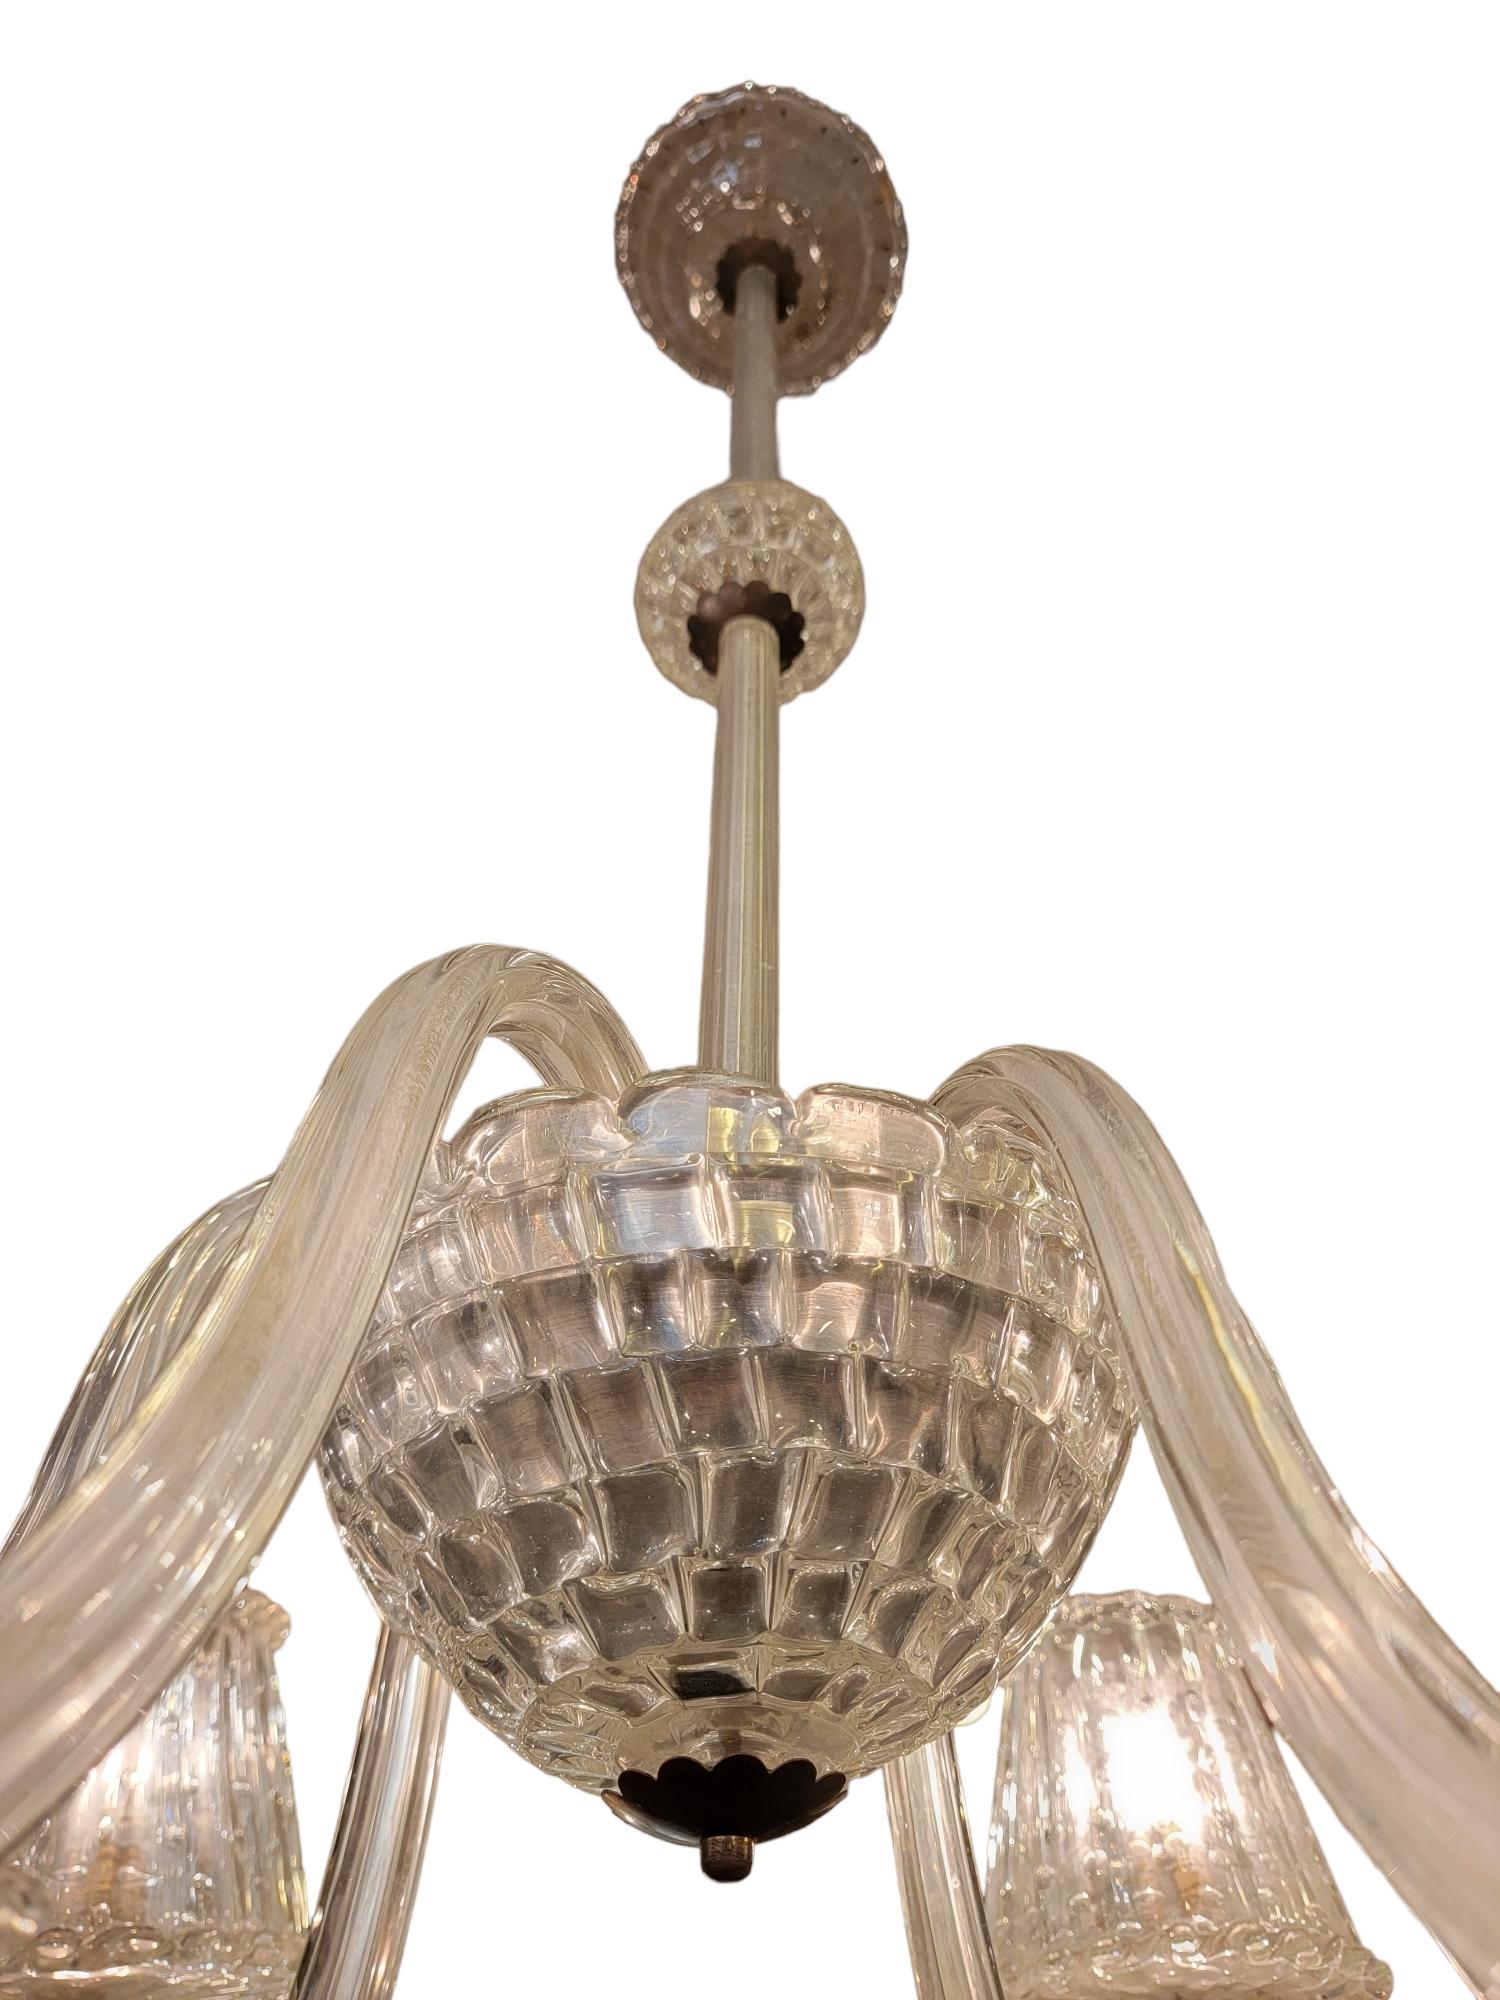 20th Century 1940s Venitian Vintage Murano Glass Chandelier by Borovier For Sale